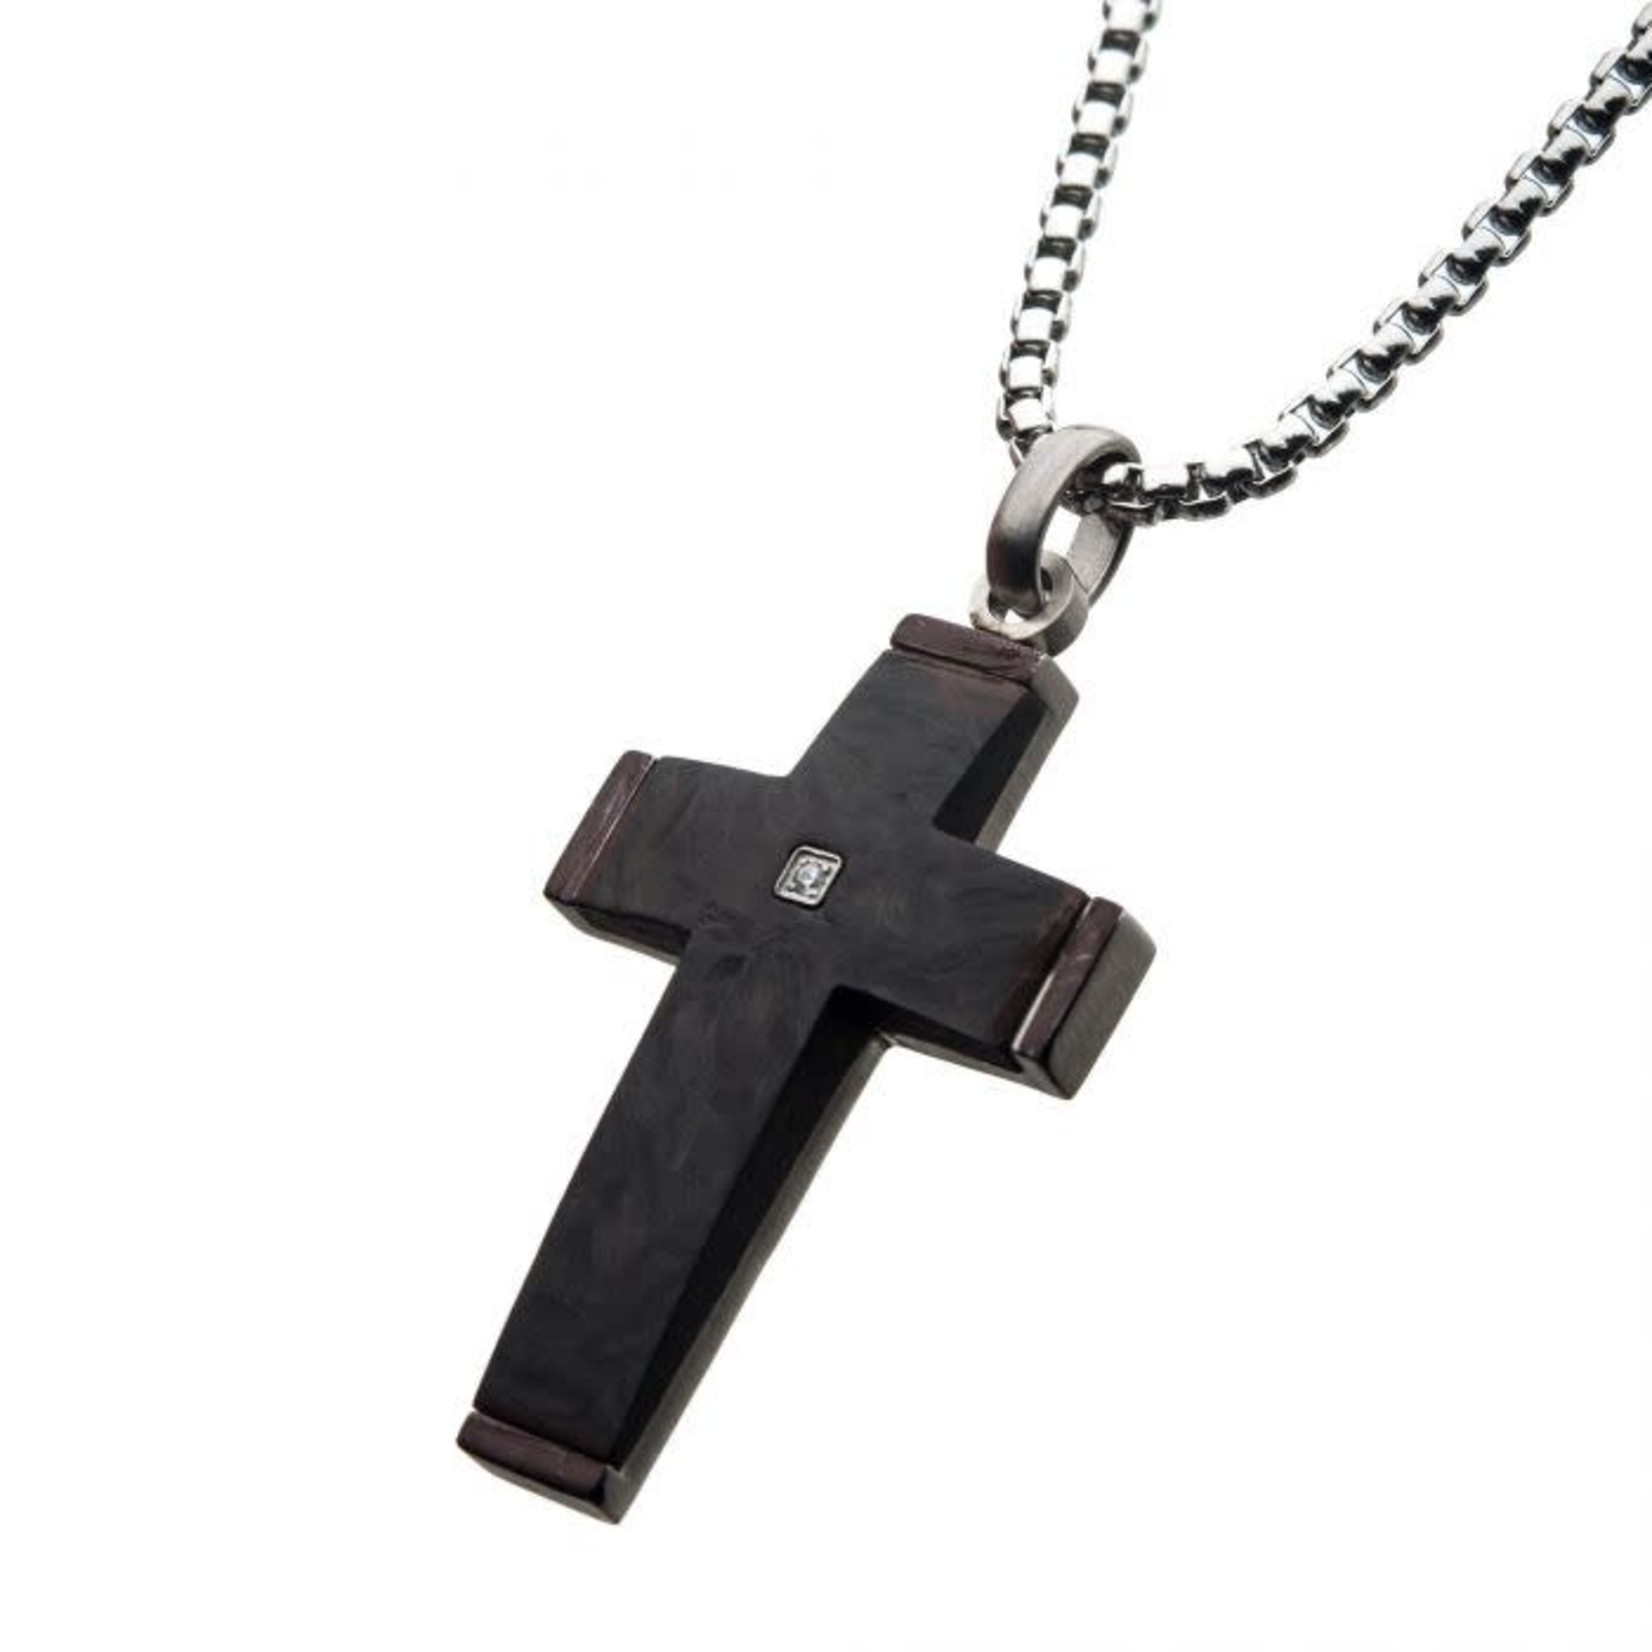 INOX Solid Carbon Cross Pendant with 1.5mm Genuine Clear Diamond